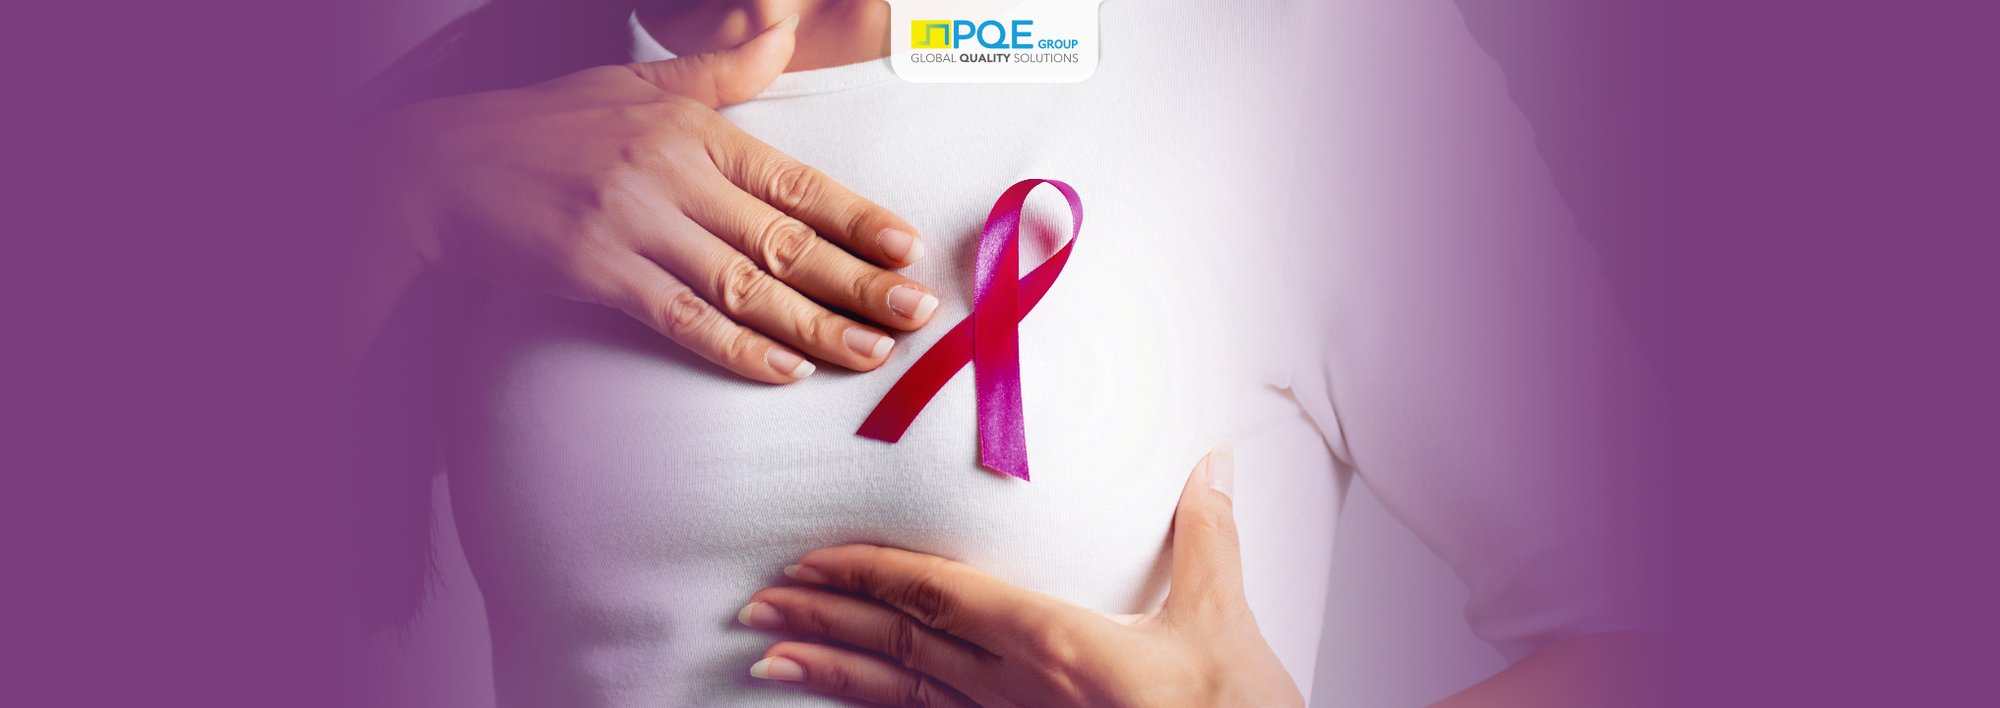 Breast Cancer Care_Site PQE